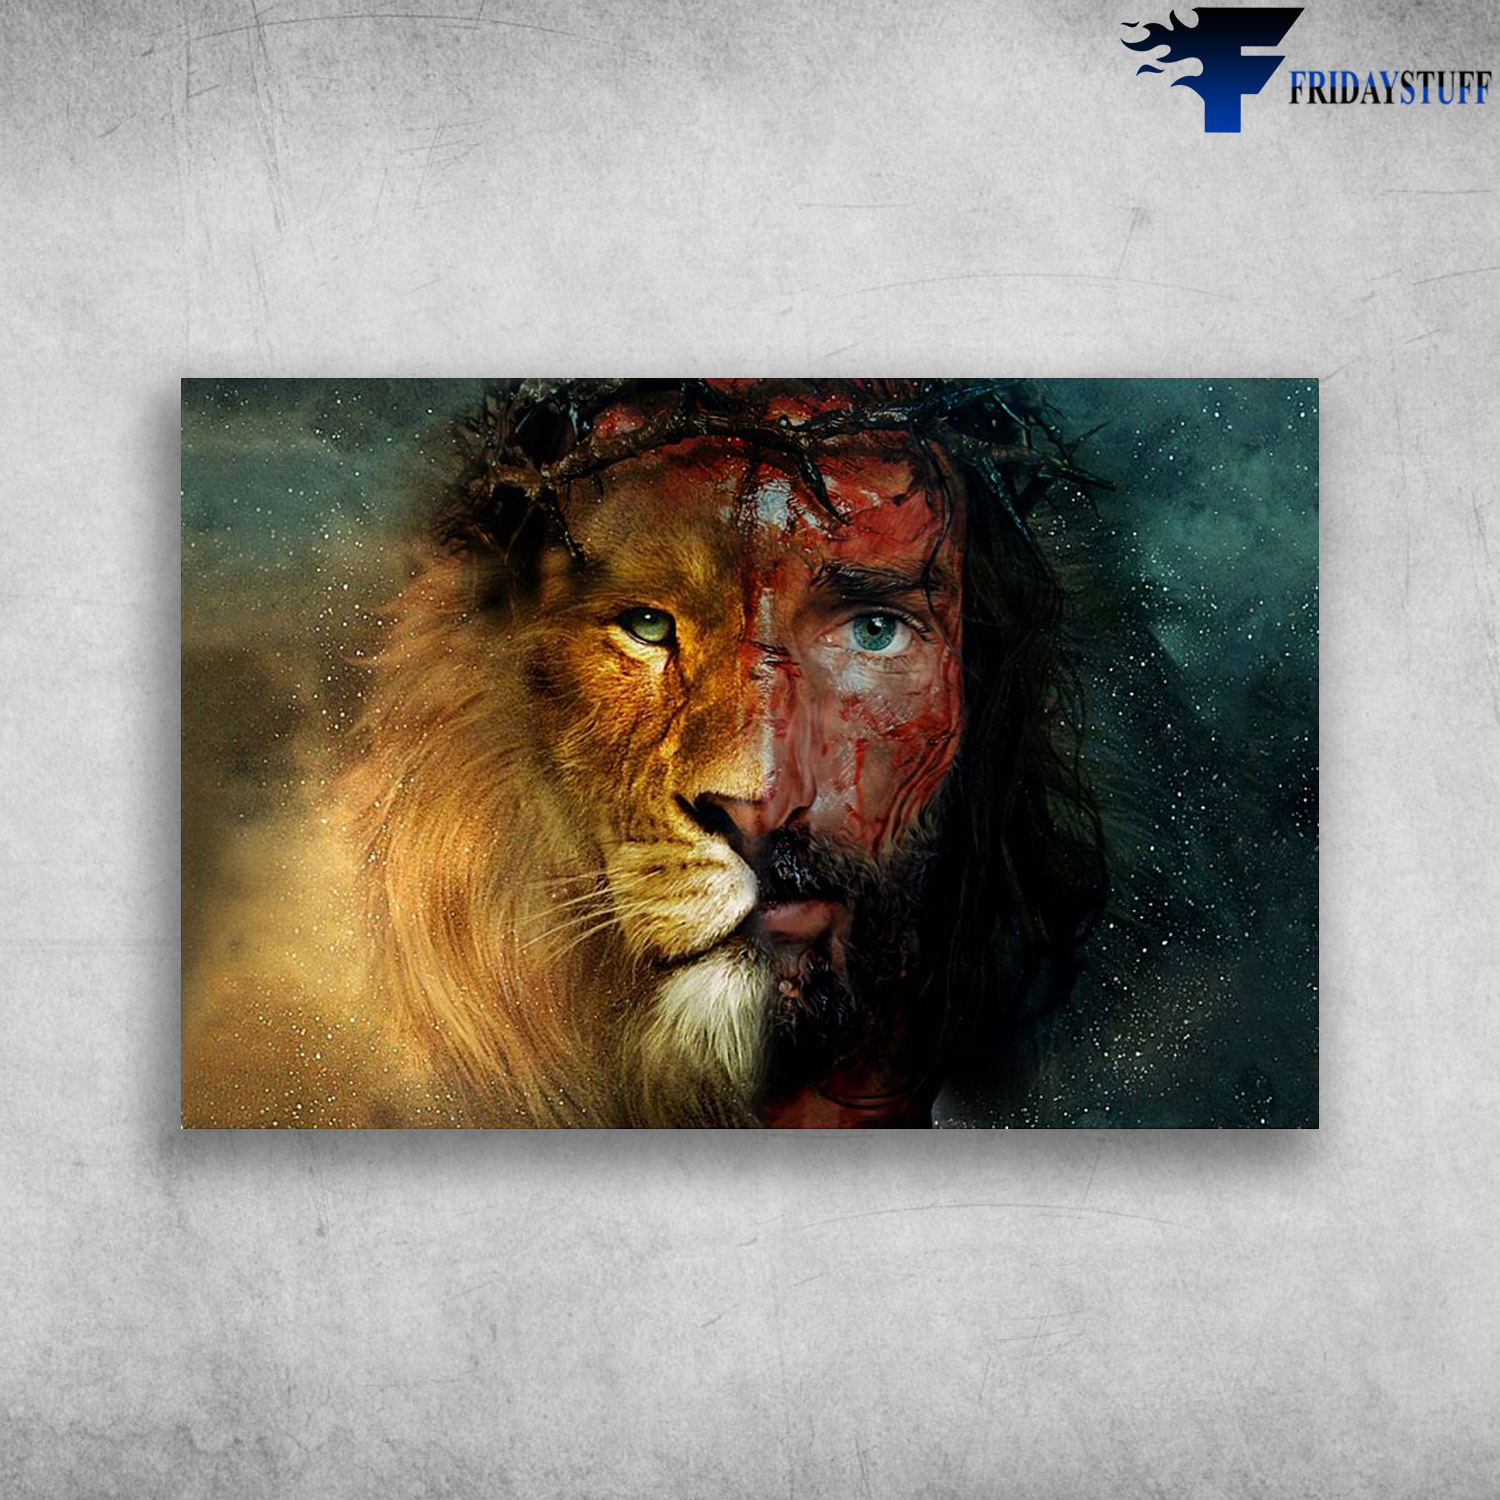 Jesus and lion - The perfect combination